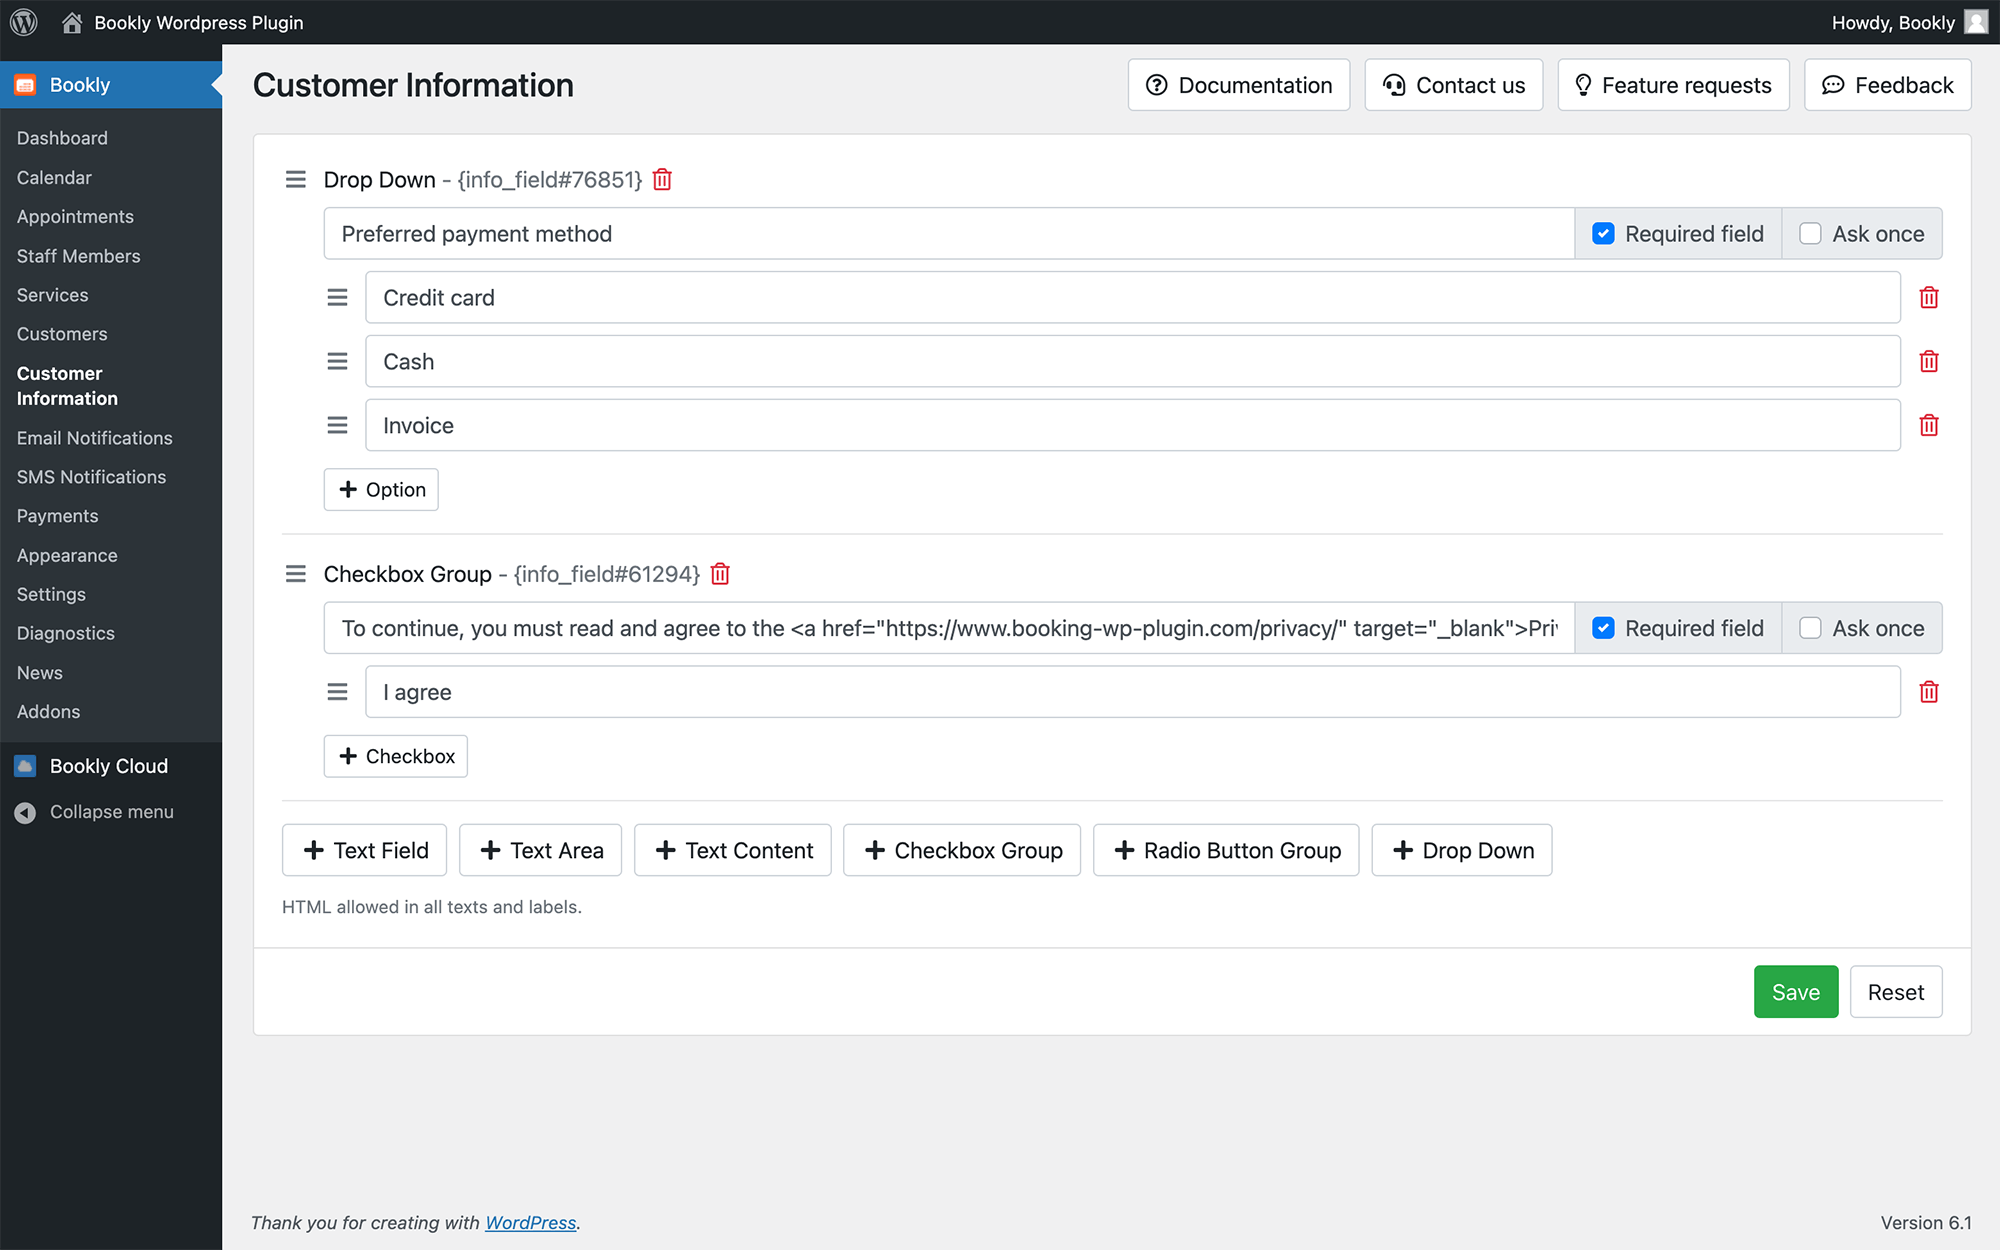 Add custom data to client’s profile in Bookly